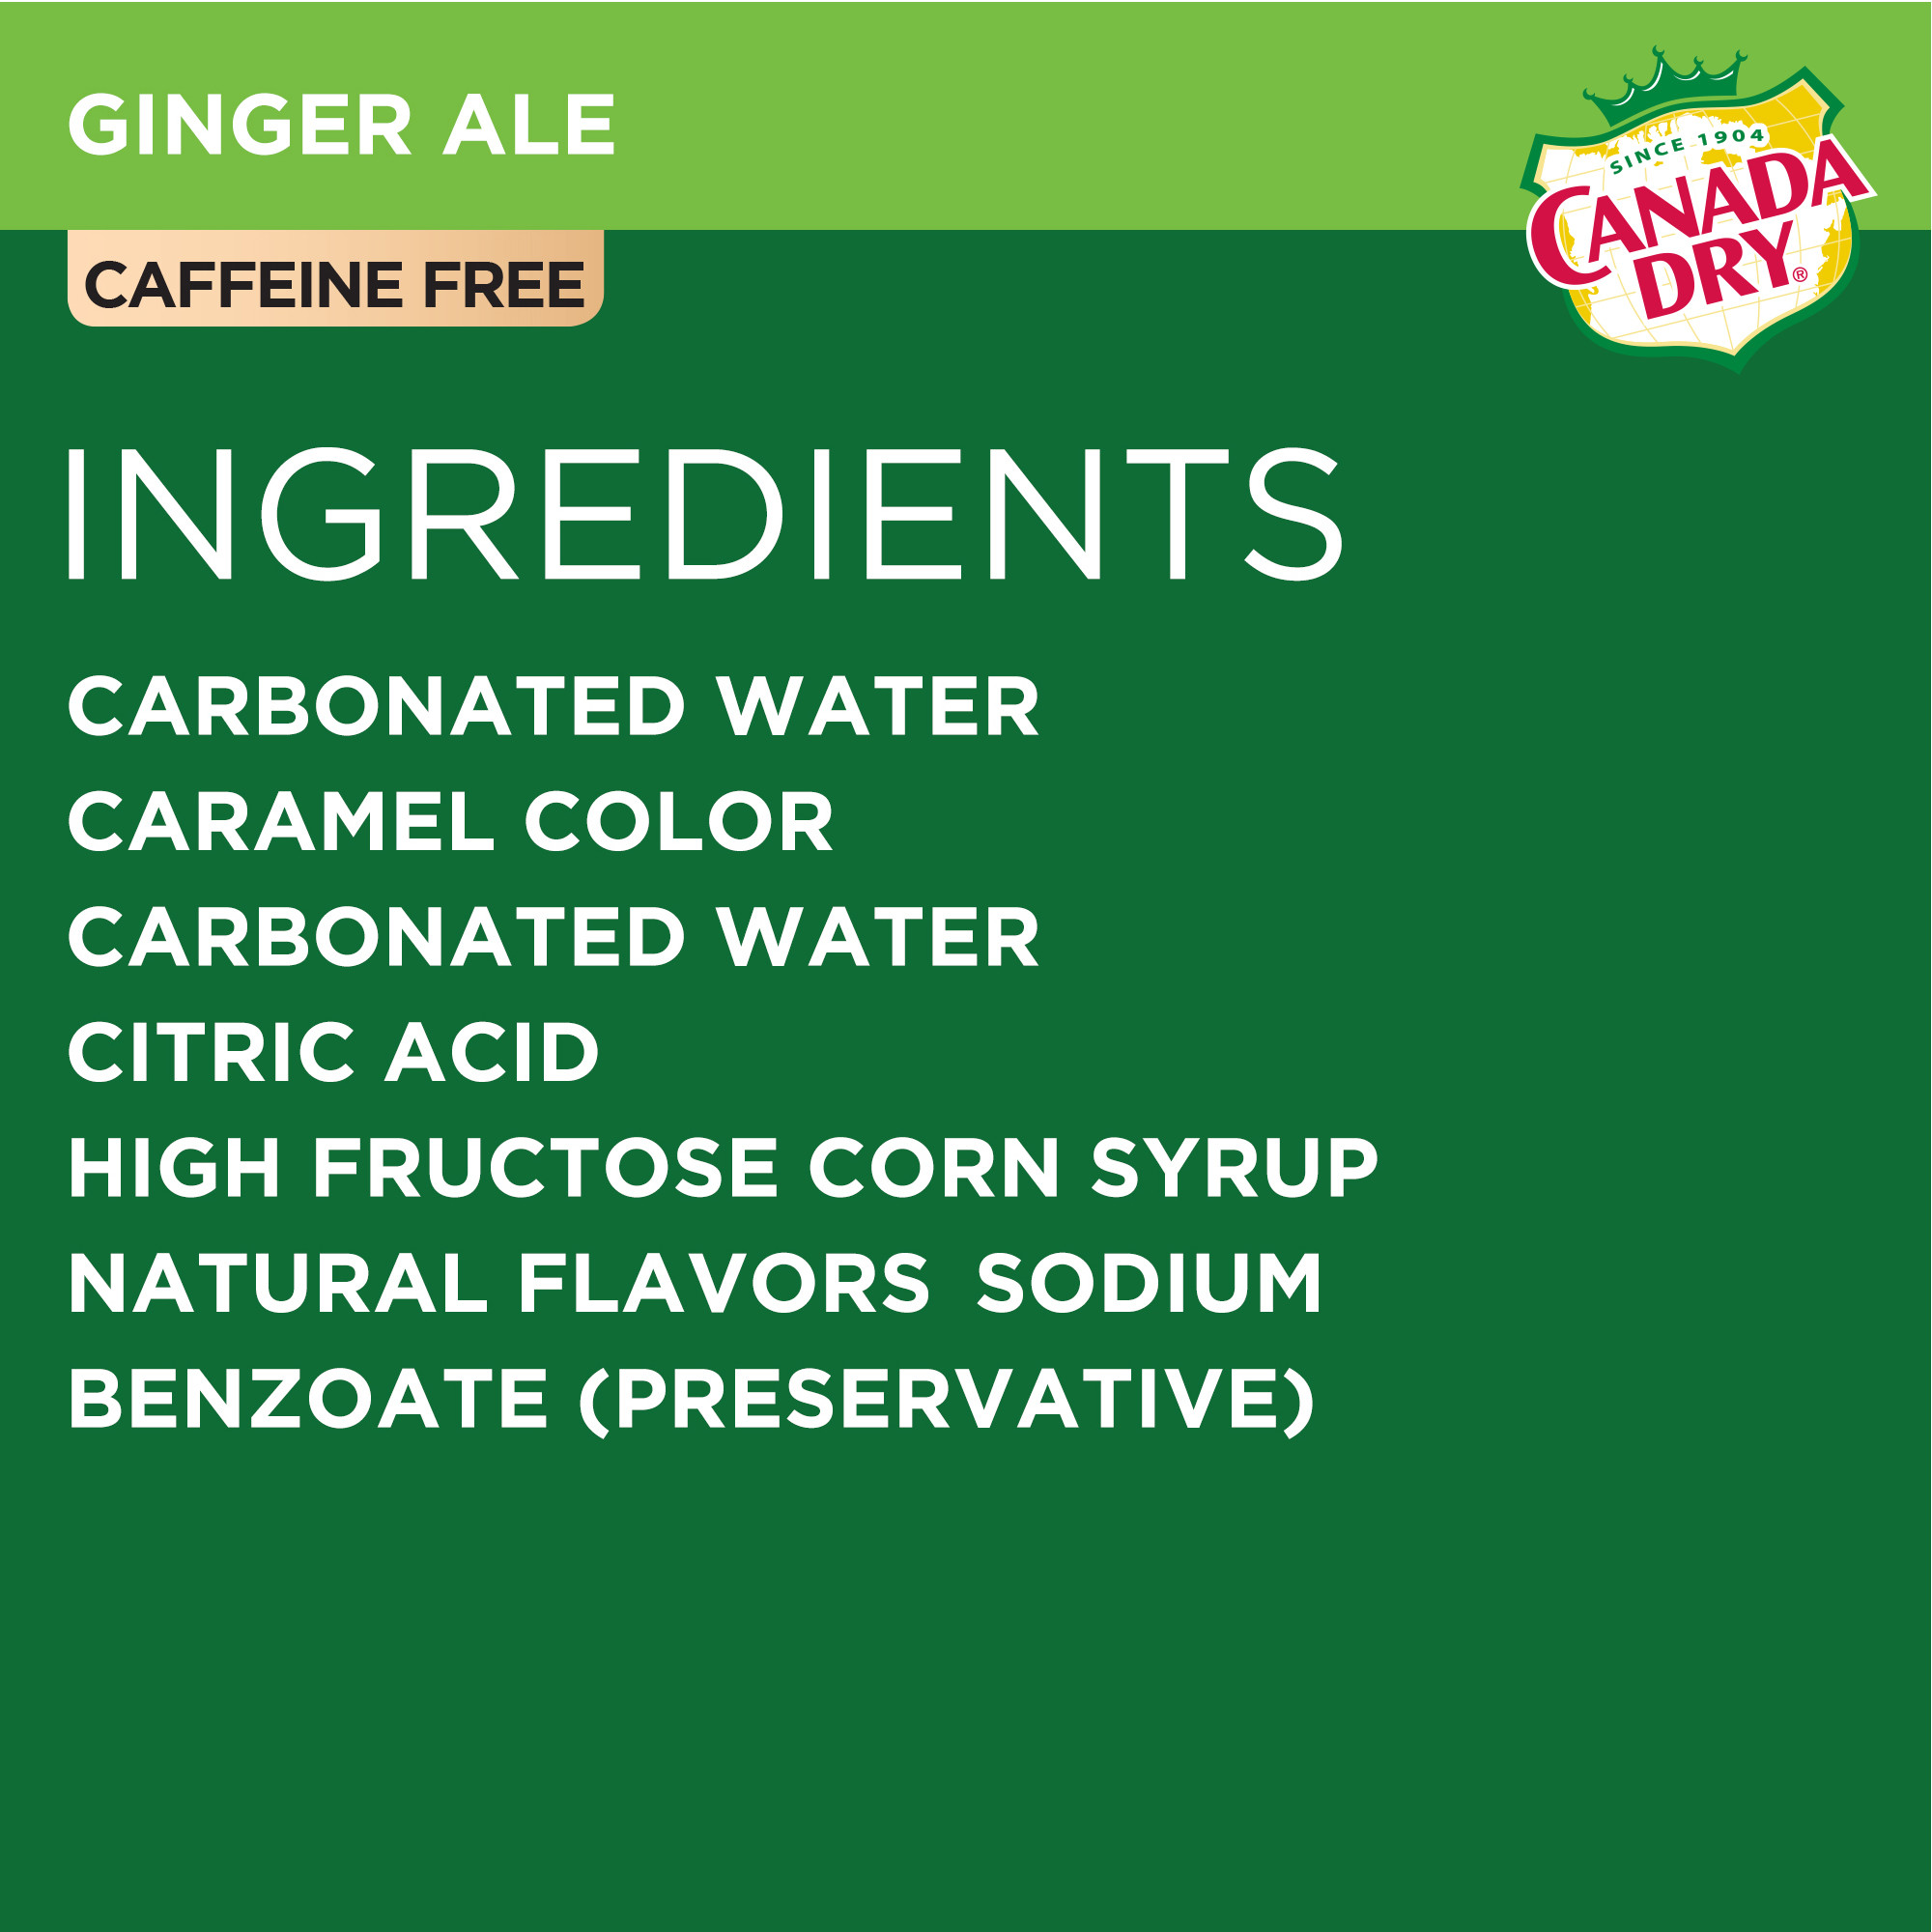 Canada Dry Caffeine Free Ginger Ale Soda Pop, 8 fl oz, 6 Pack Cans - image 3 of 9